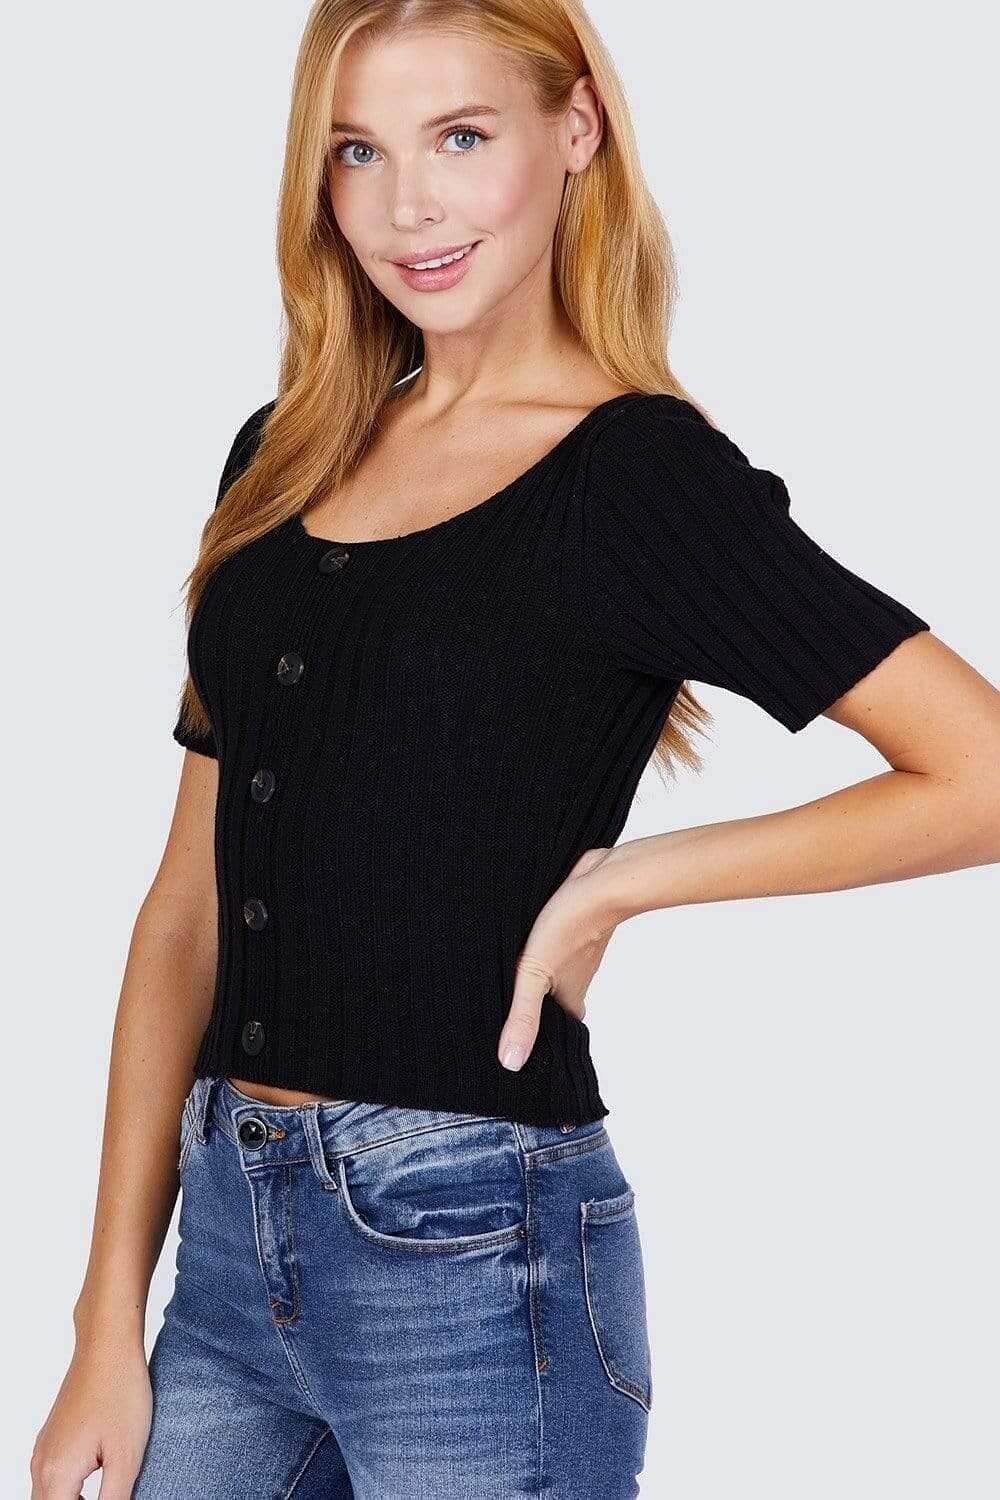 Black Short Sleeve Rib Knitted Sweater - Shopping Therapy L Top